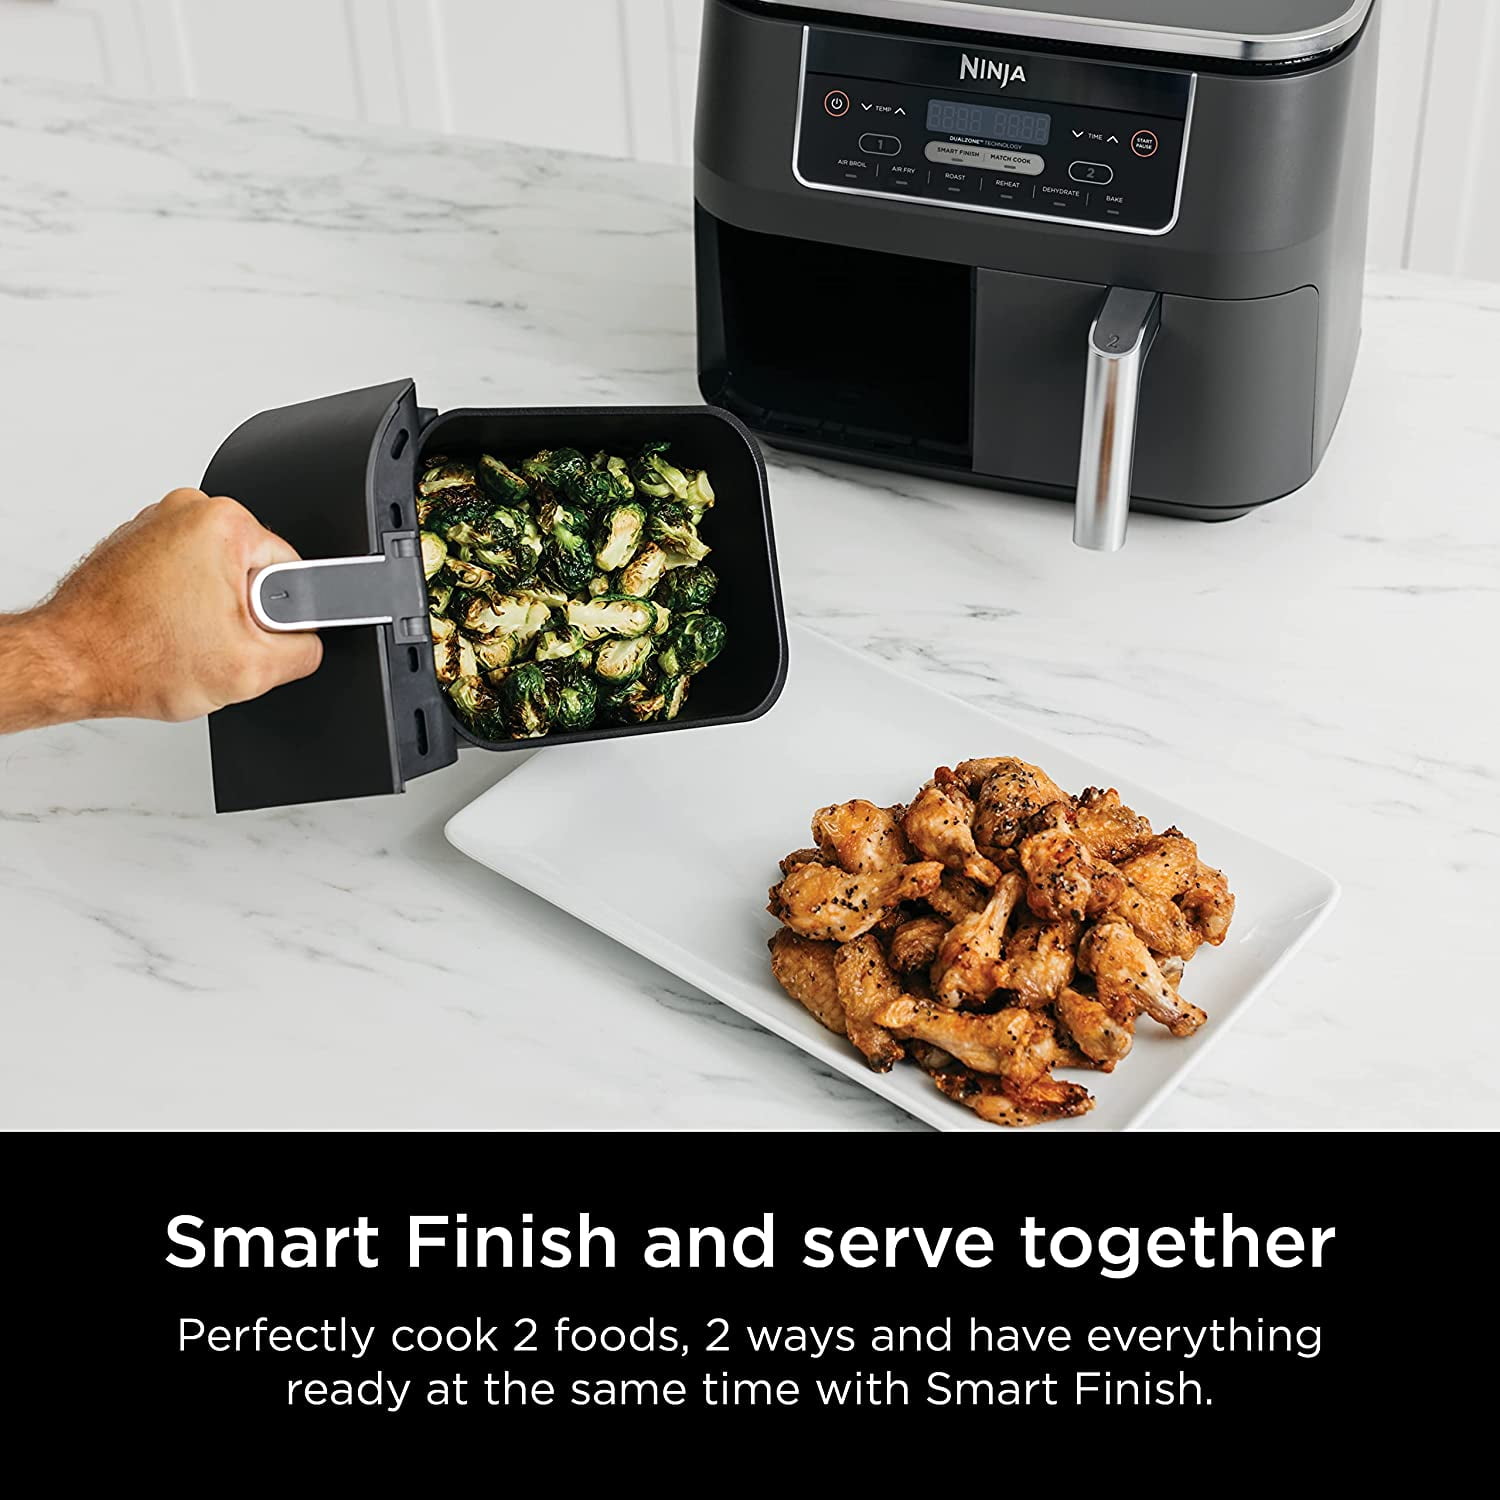 FOODI® 2-BASKET AIR FRYER, air fryer, basket, Mix and match 6 functions  like air fry, roast, bake & more across two independent baskets, By Ninja  Kitchen